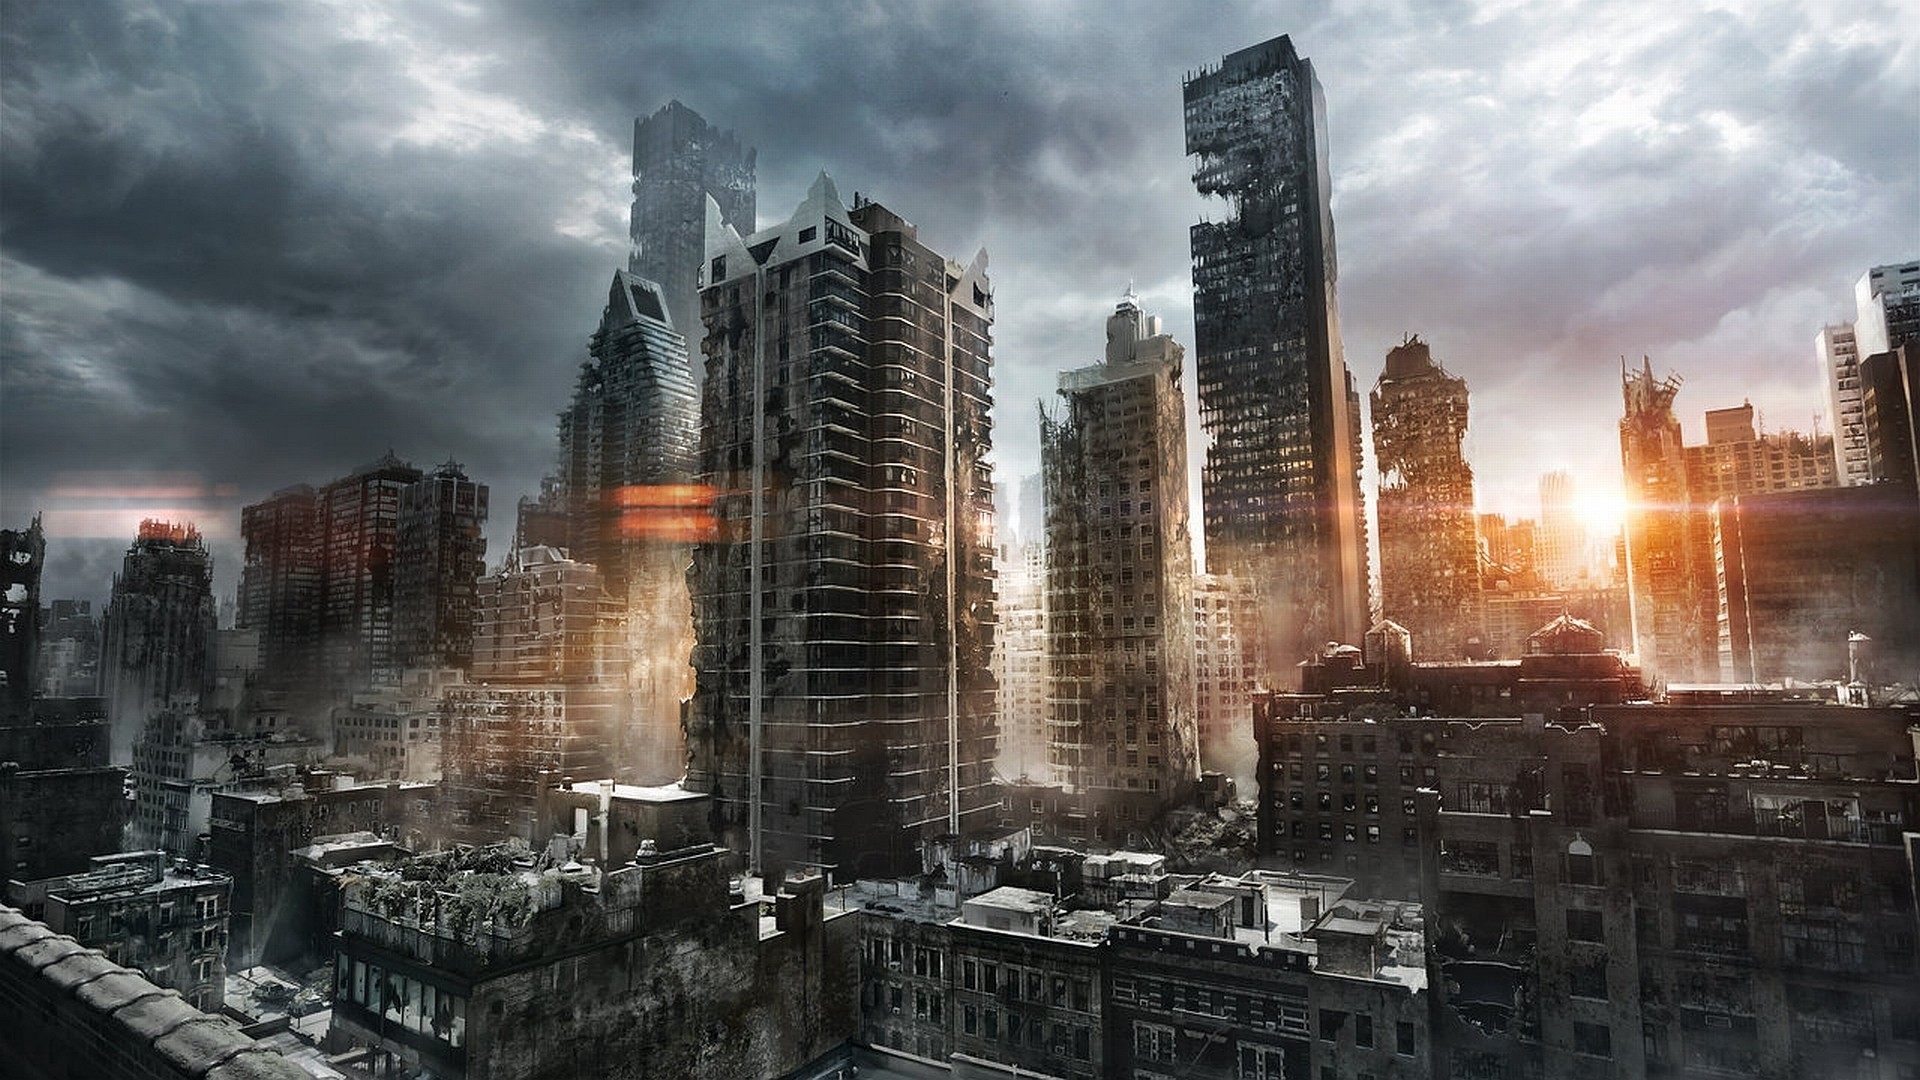 Tom Clancys The Division City Building Video Games Apocalyptic Cityscape Ruin Digital Art 1920x1080